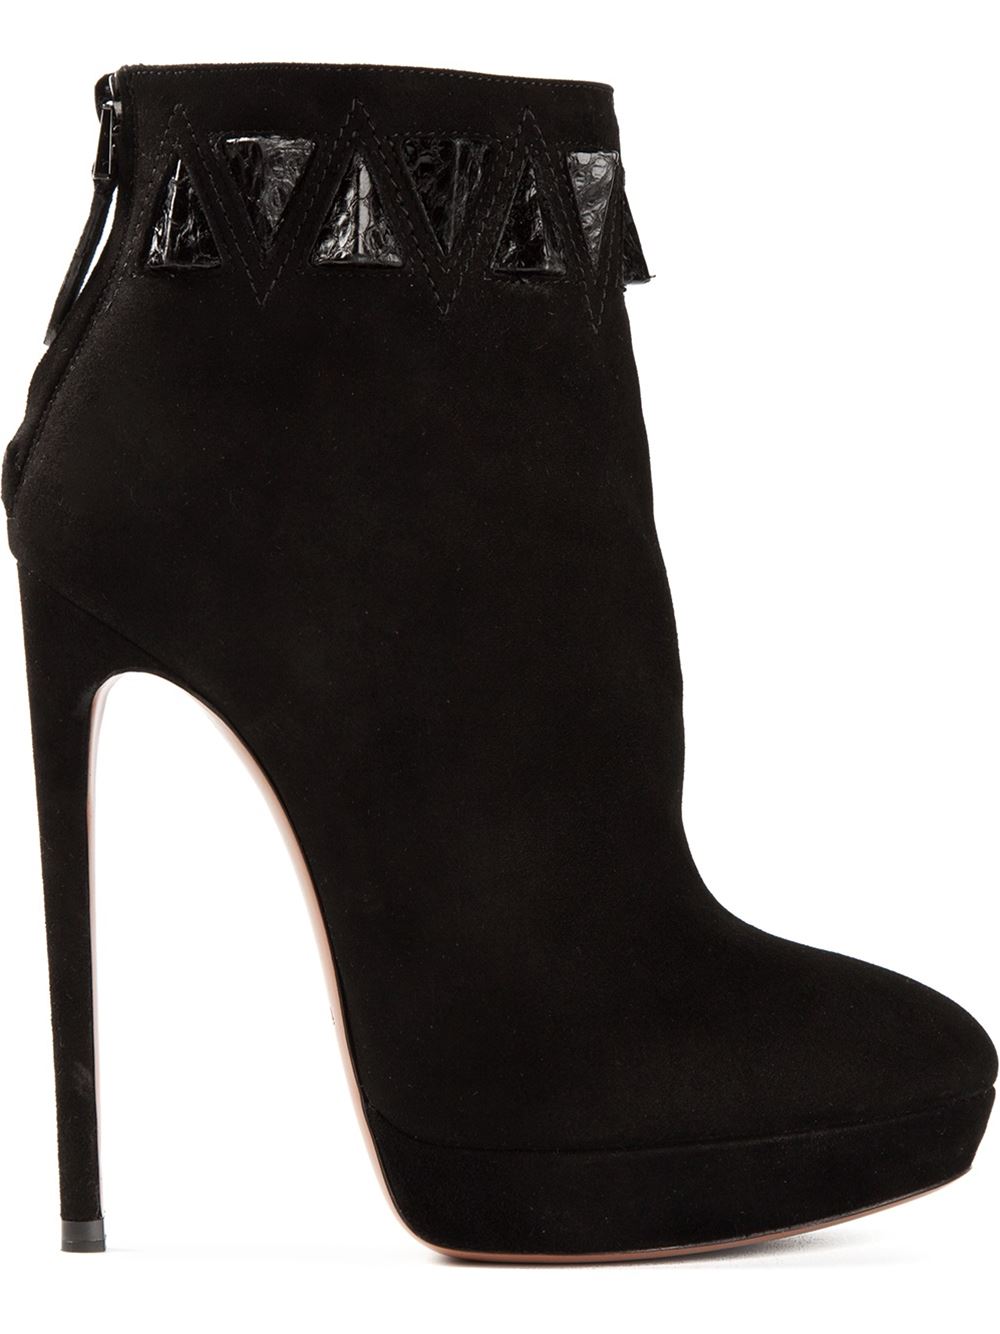 Black chamois and python skin leather ankle boots from Alaia